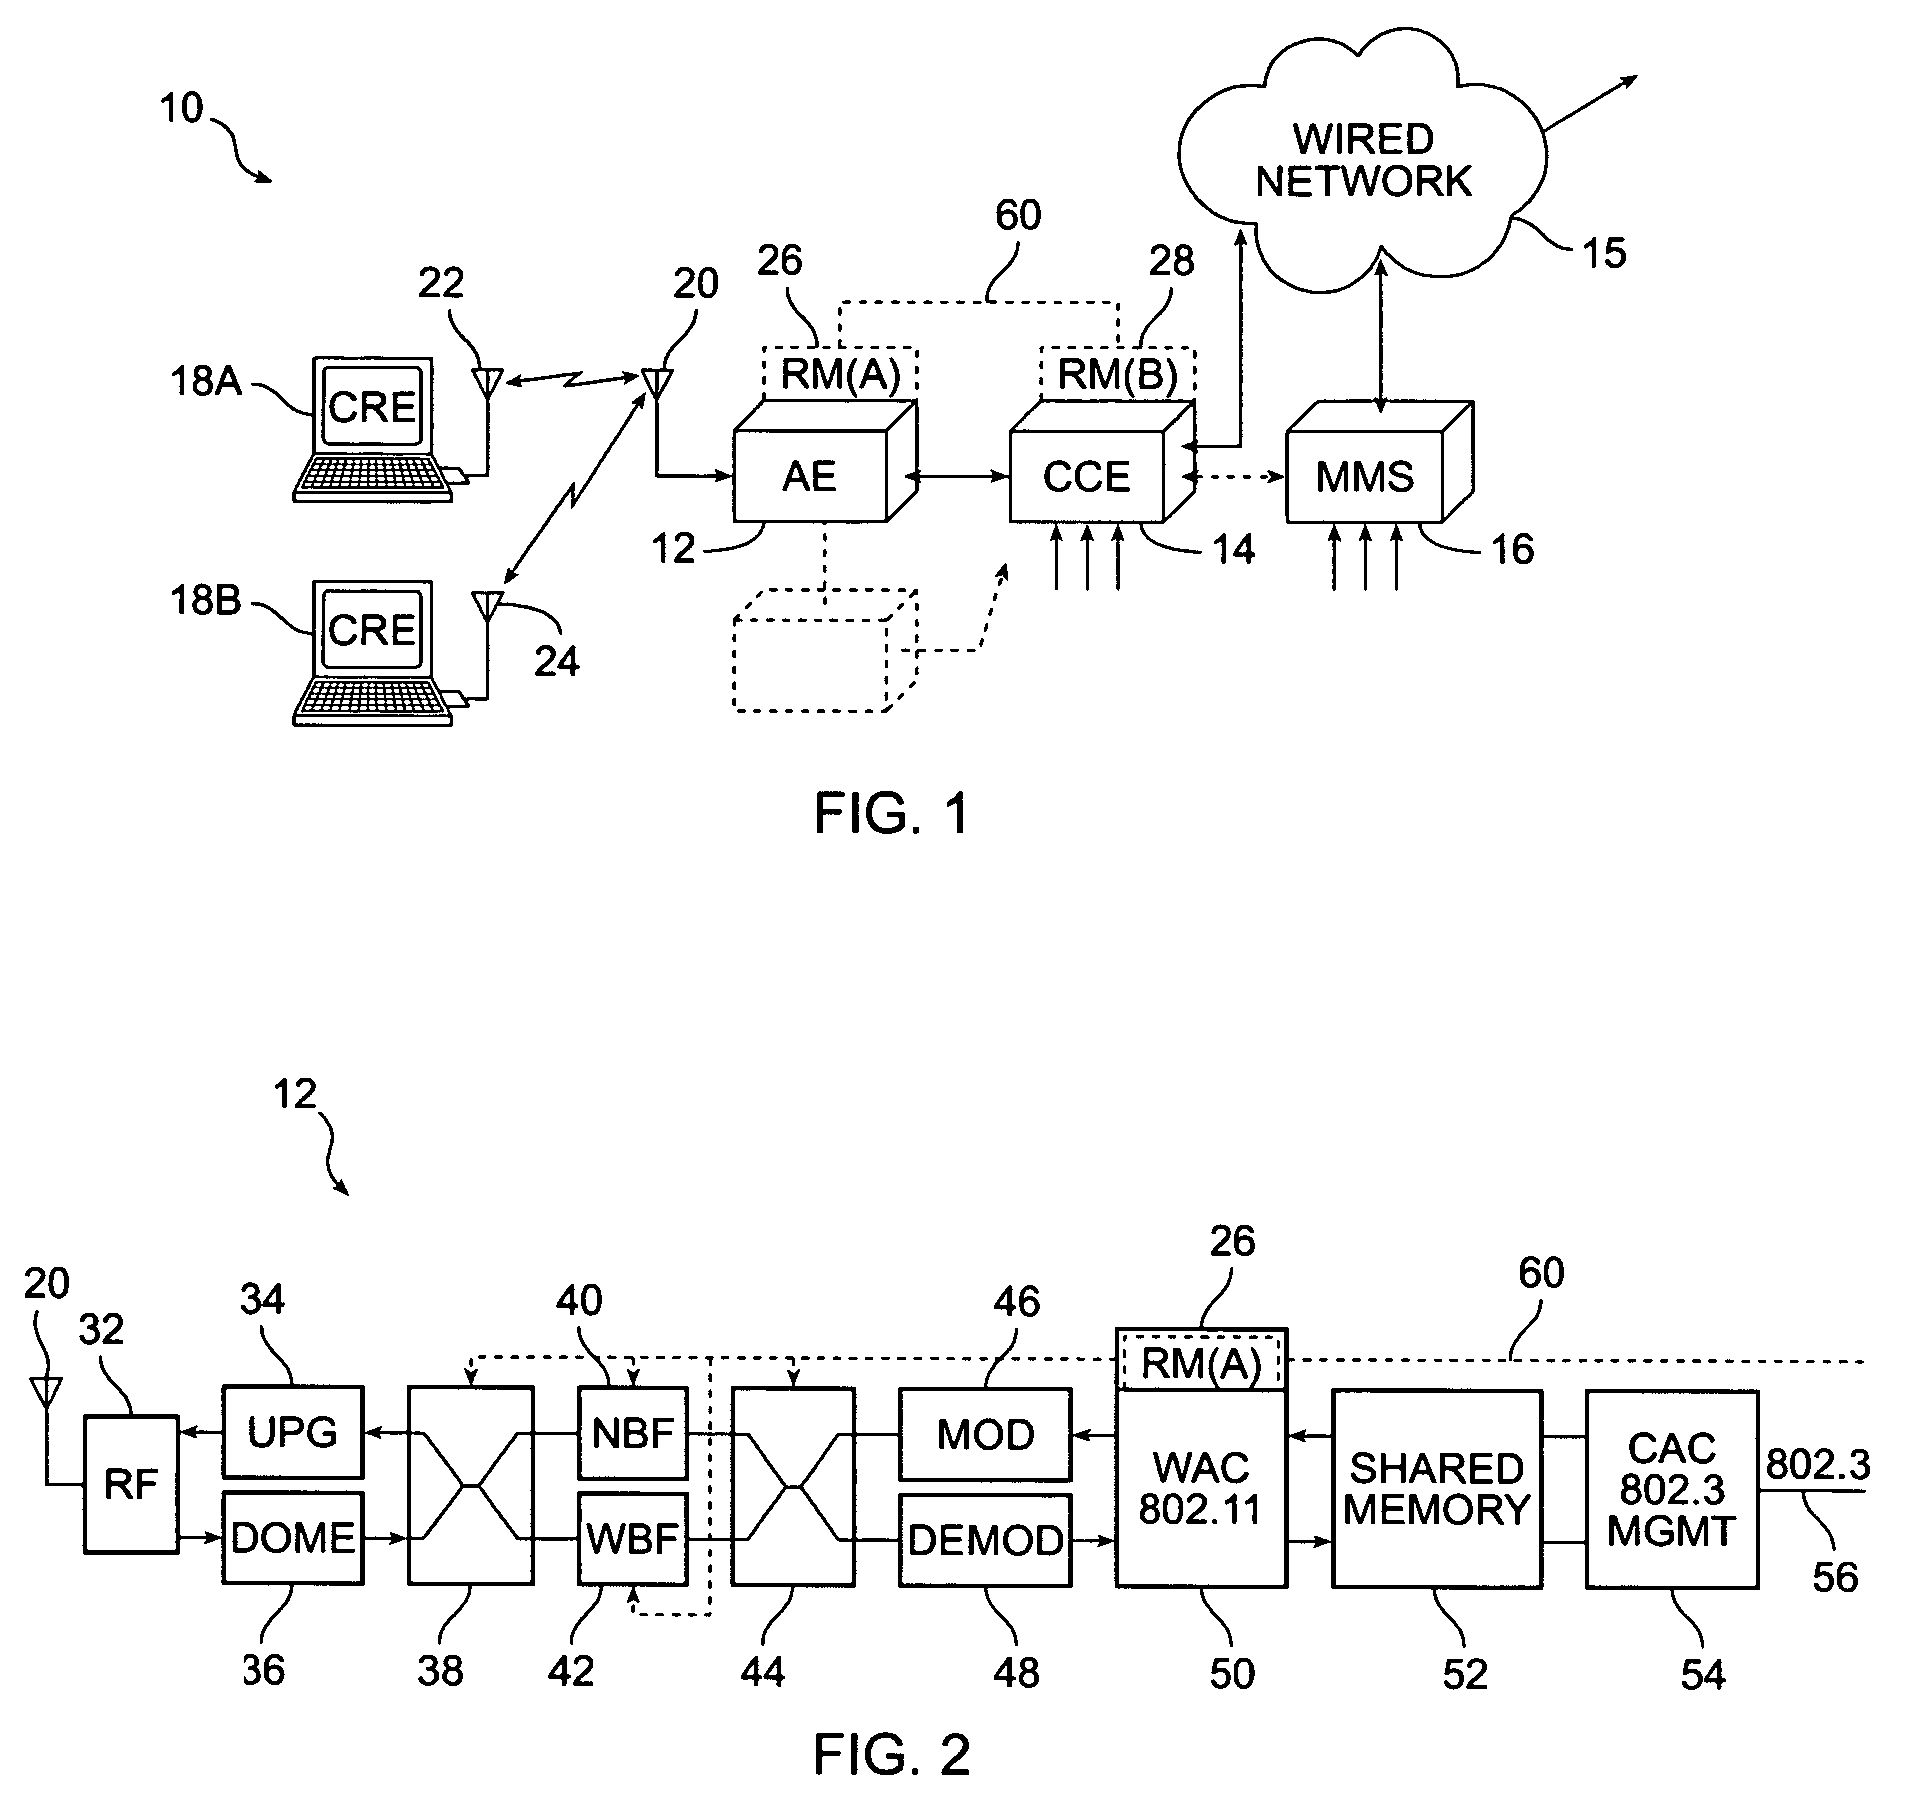 Method and system for dynamically assigning channels across multiple access elements in a wireless LAN